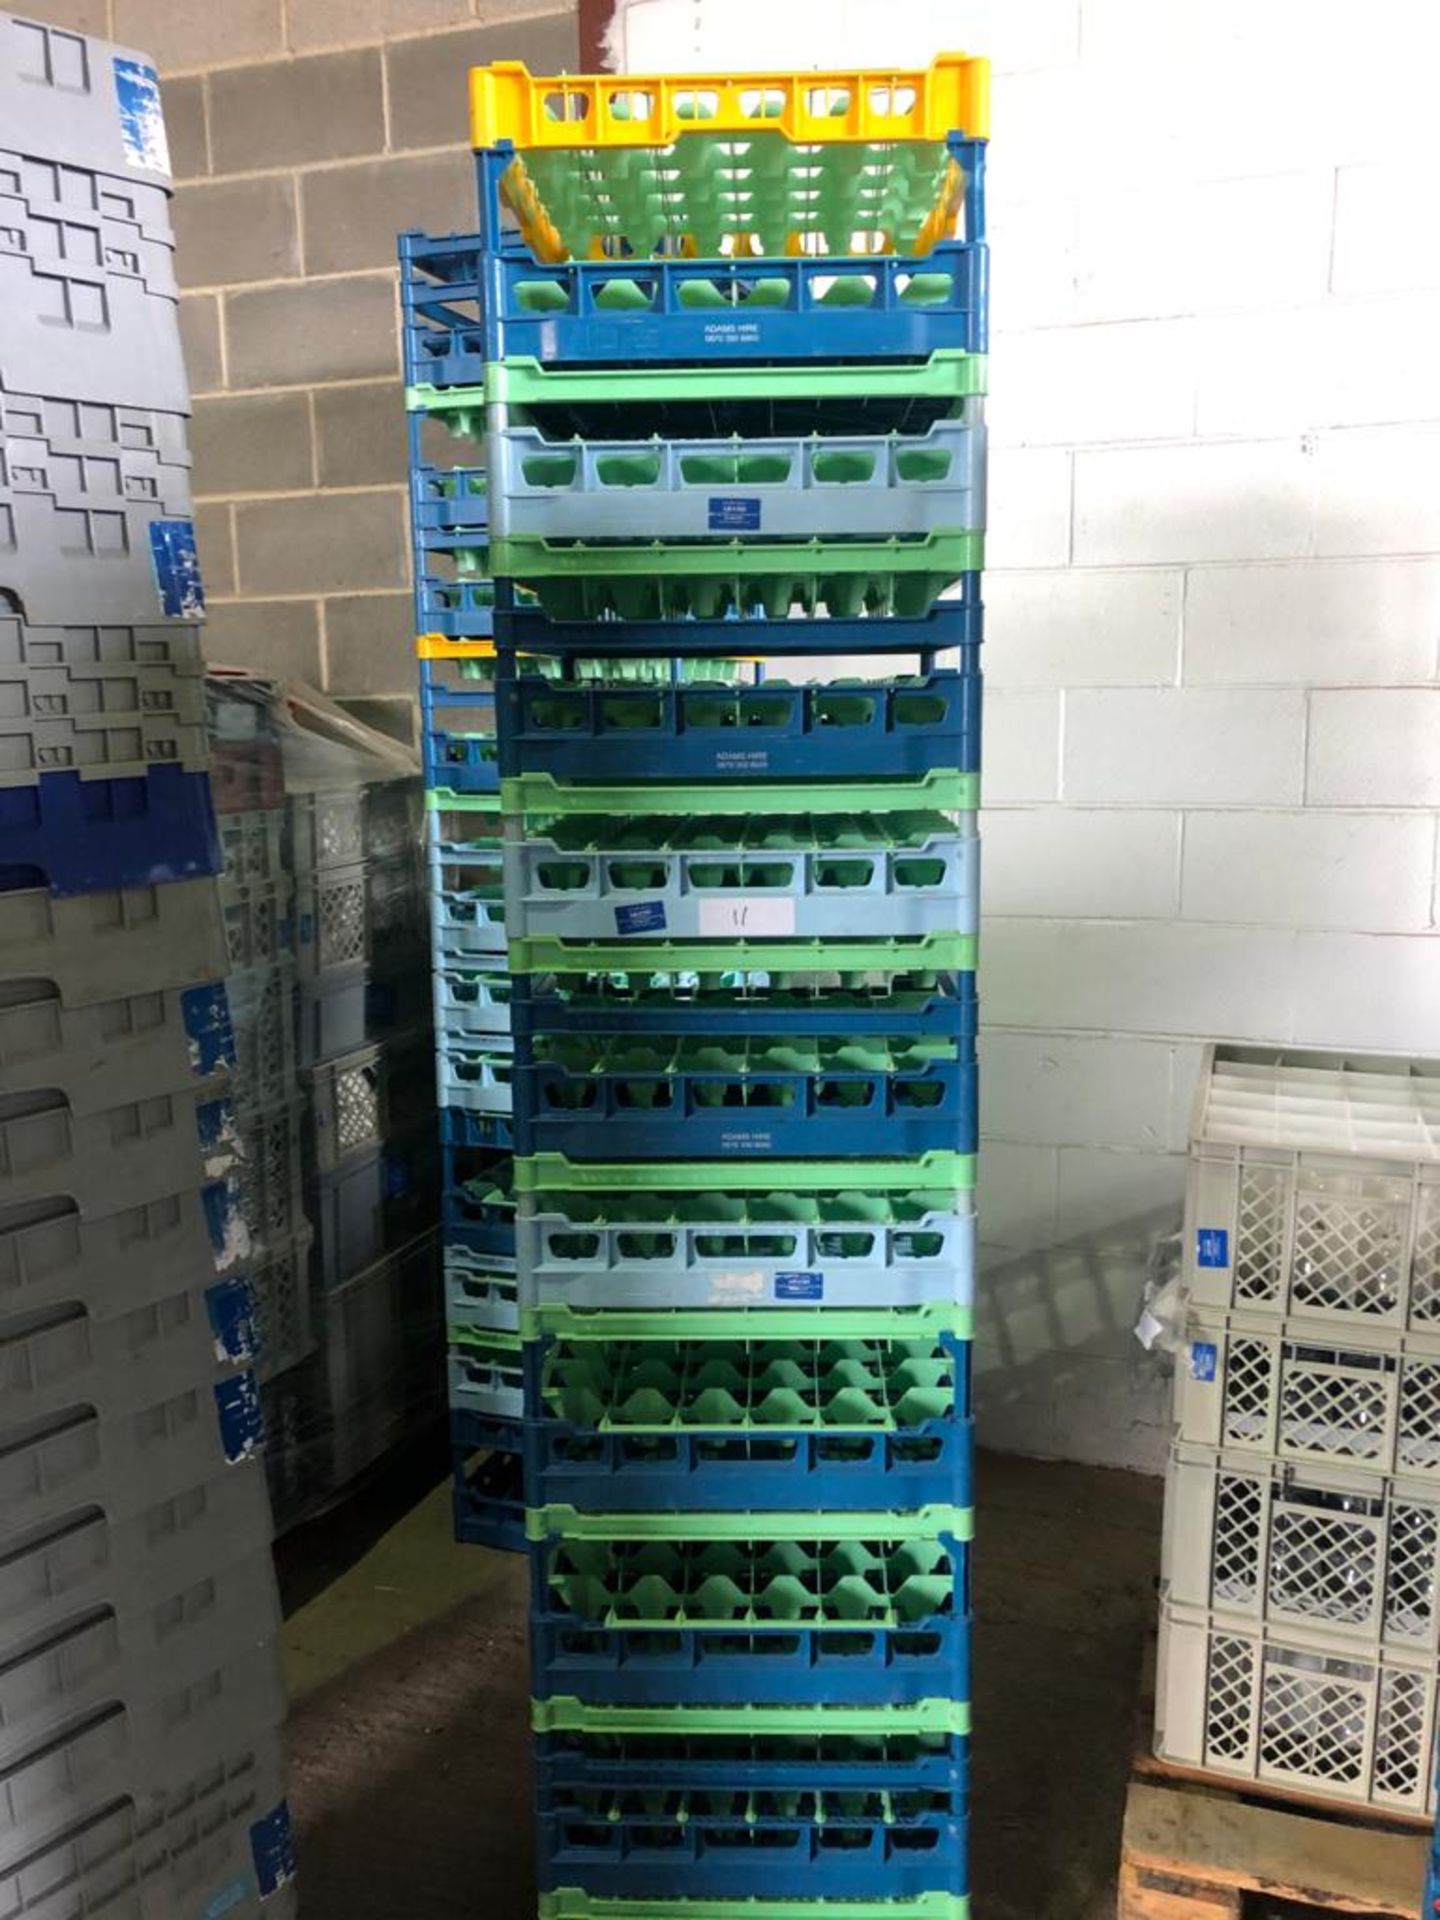 10 x Glass Fries Racks 500/500mm - Mixure of glasses held within crate. 16's, 25's, 36's, 49's